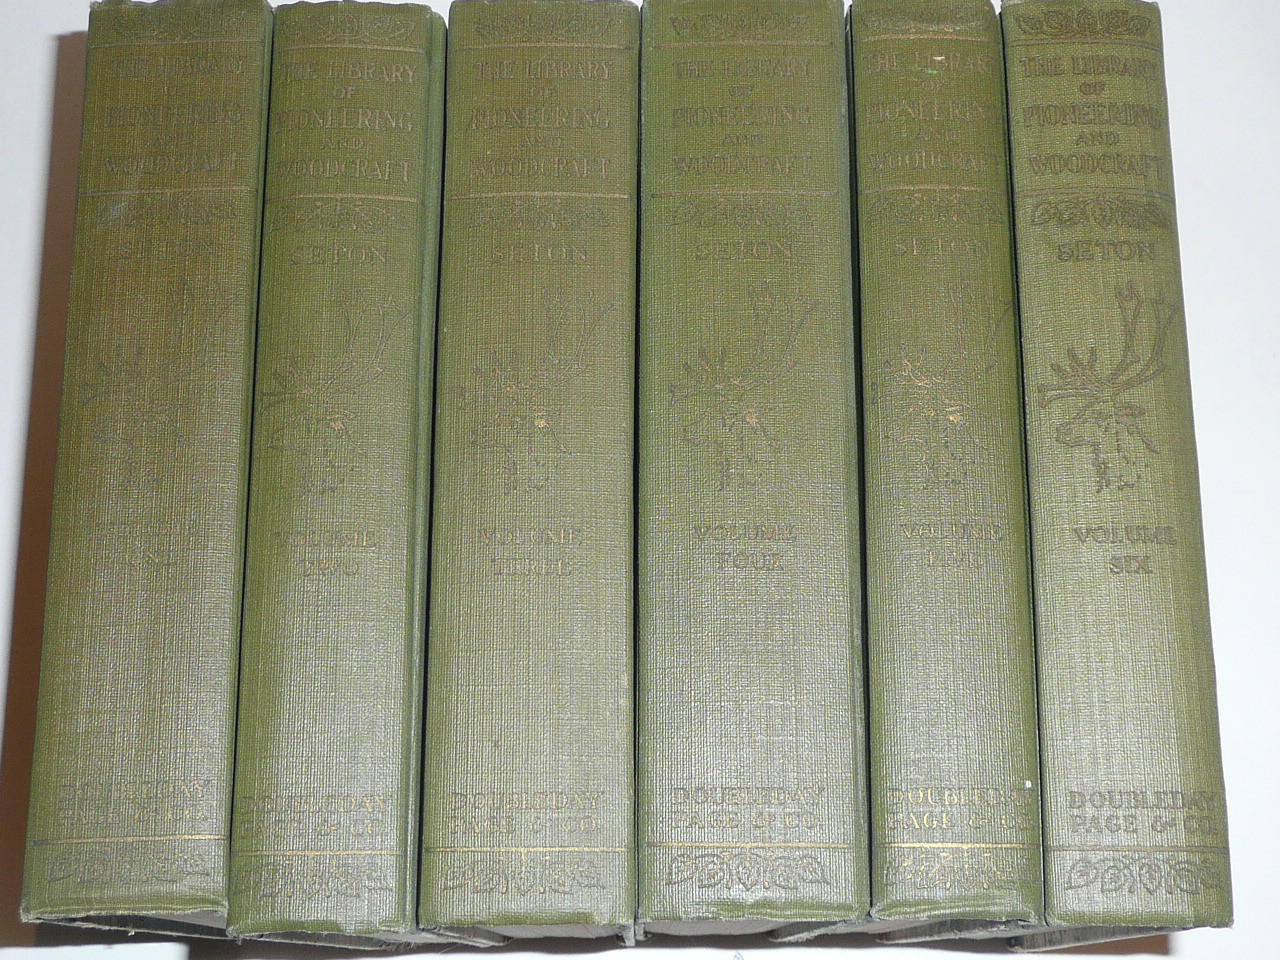 THE LIBRARY OF PIONEERING AND WOODCRAFT By Ernest T. Seton, 1925, 6 Vol. Set Books BUT only vol 2 here, Wild Animal Ways